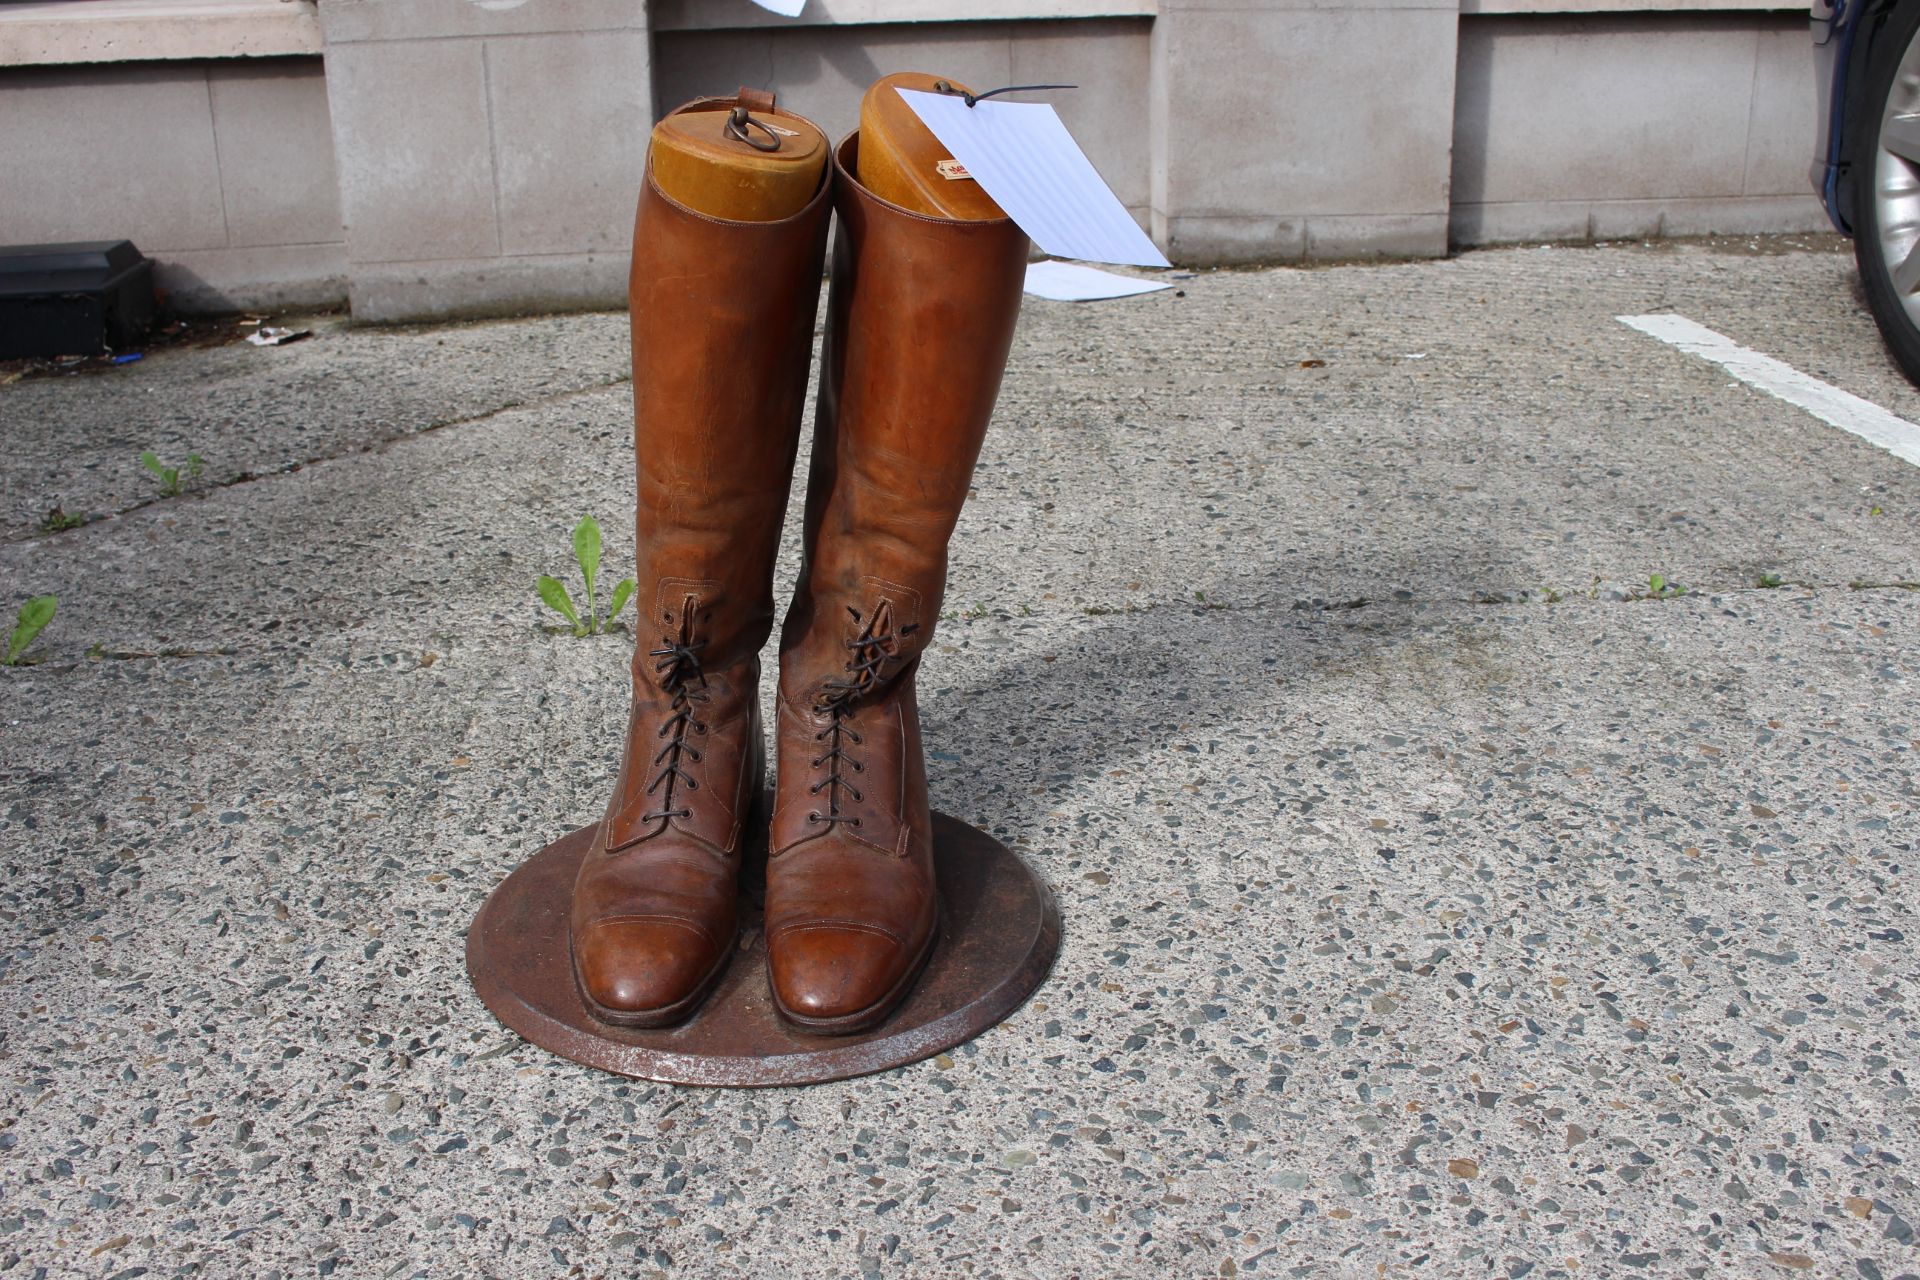 leather tan shop desplay boots on stainless steel stand with Morland's woods  H:51CM